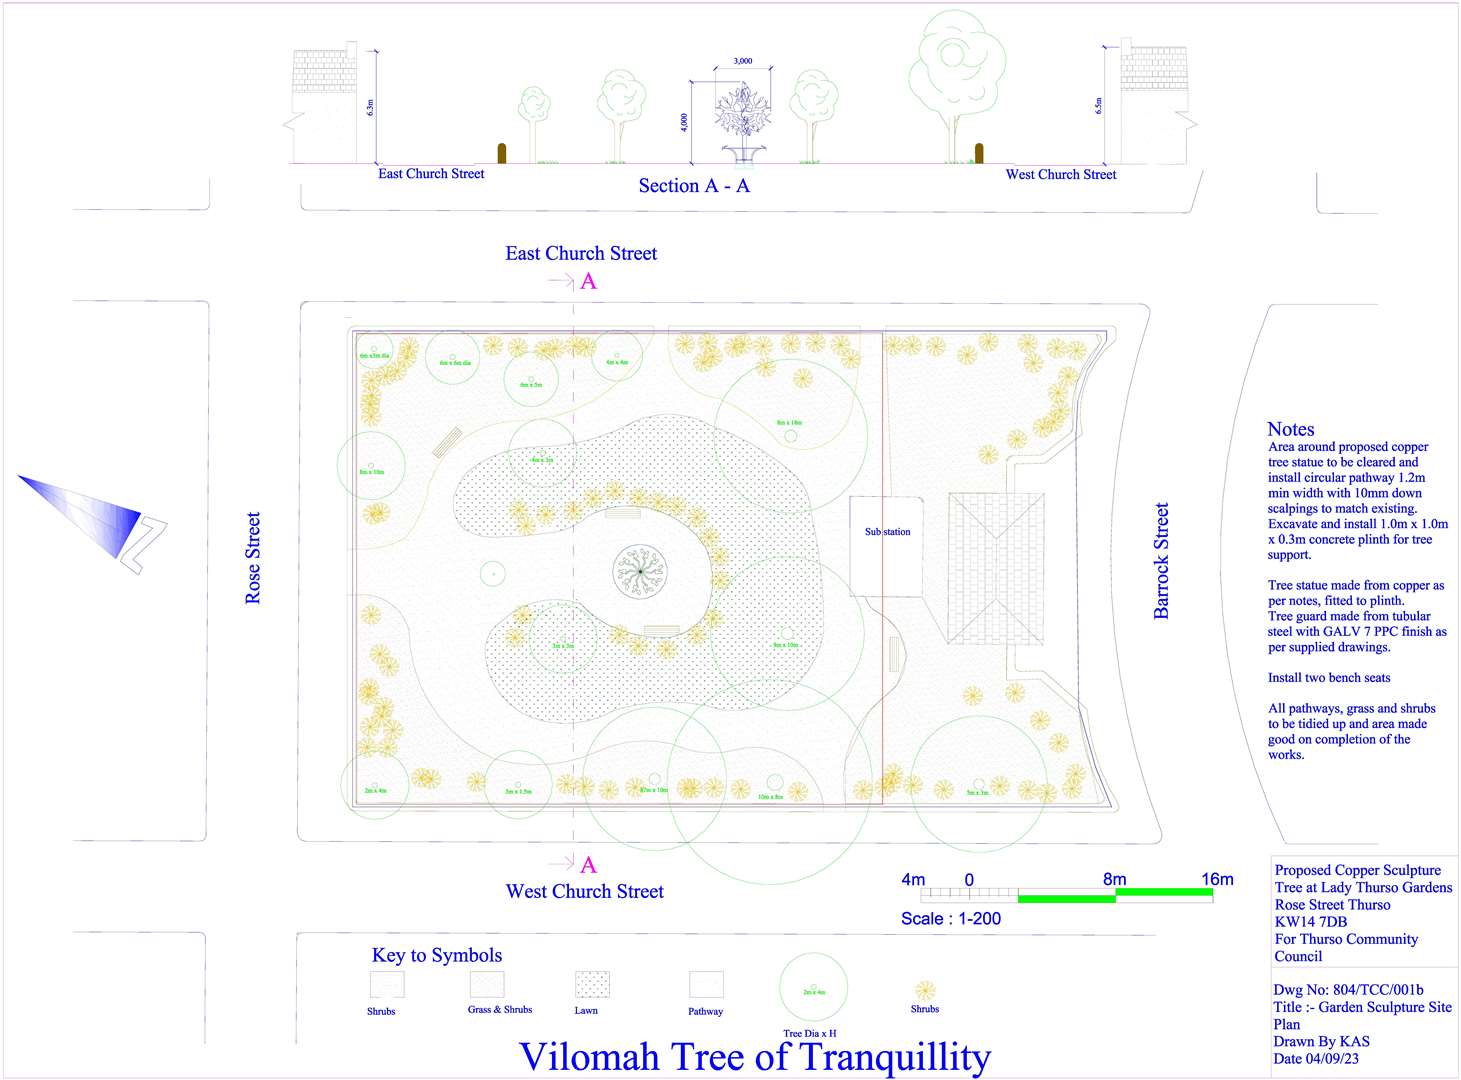 More detailed plan of the site showing where the tree will be erected.